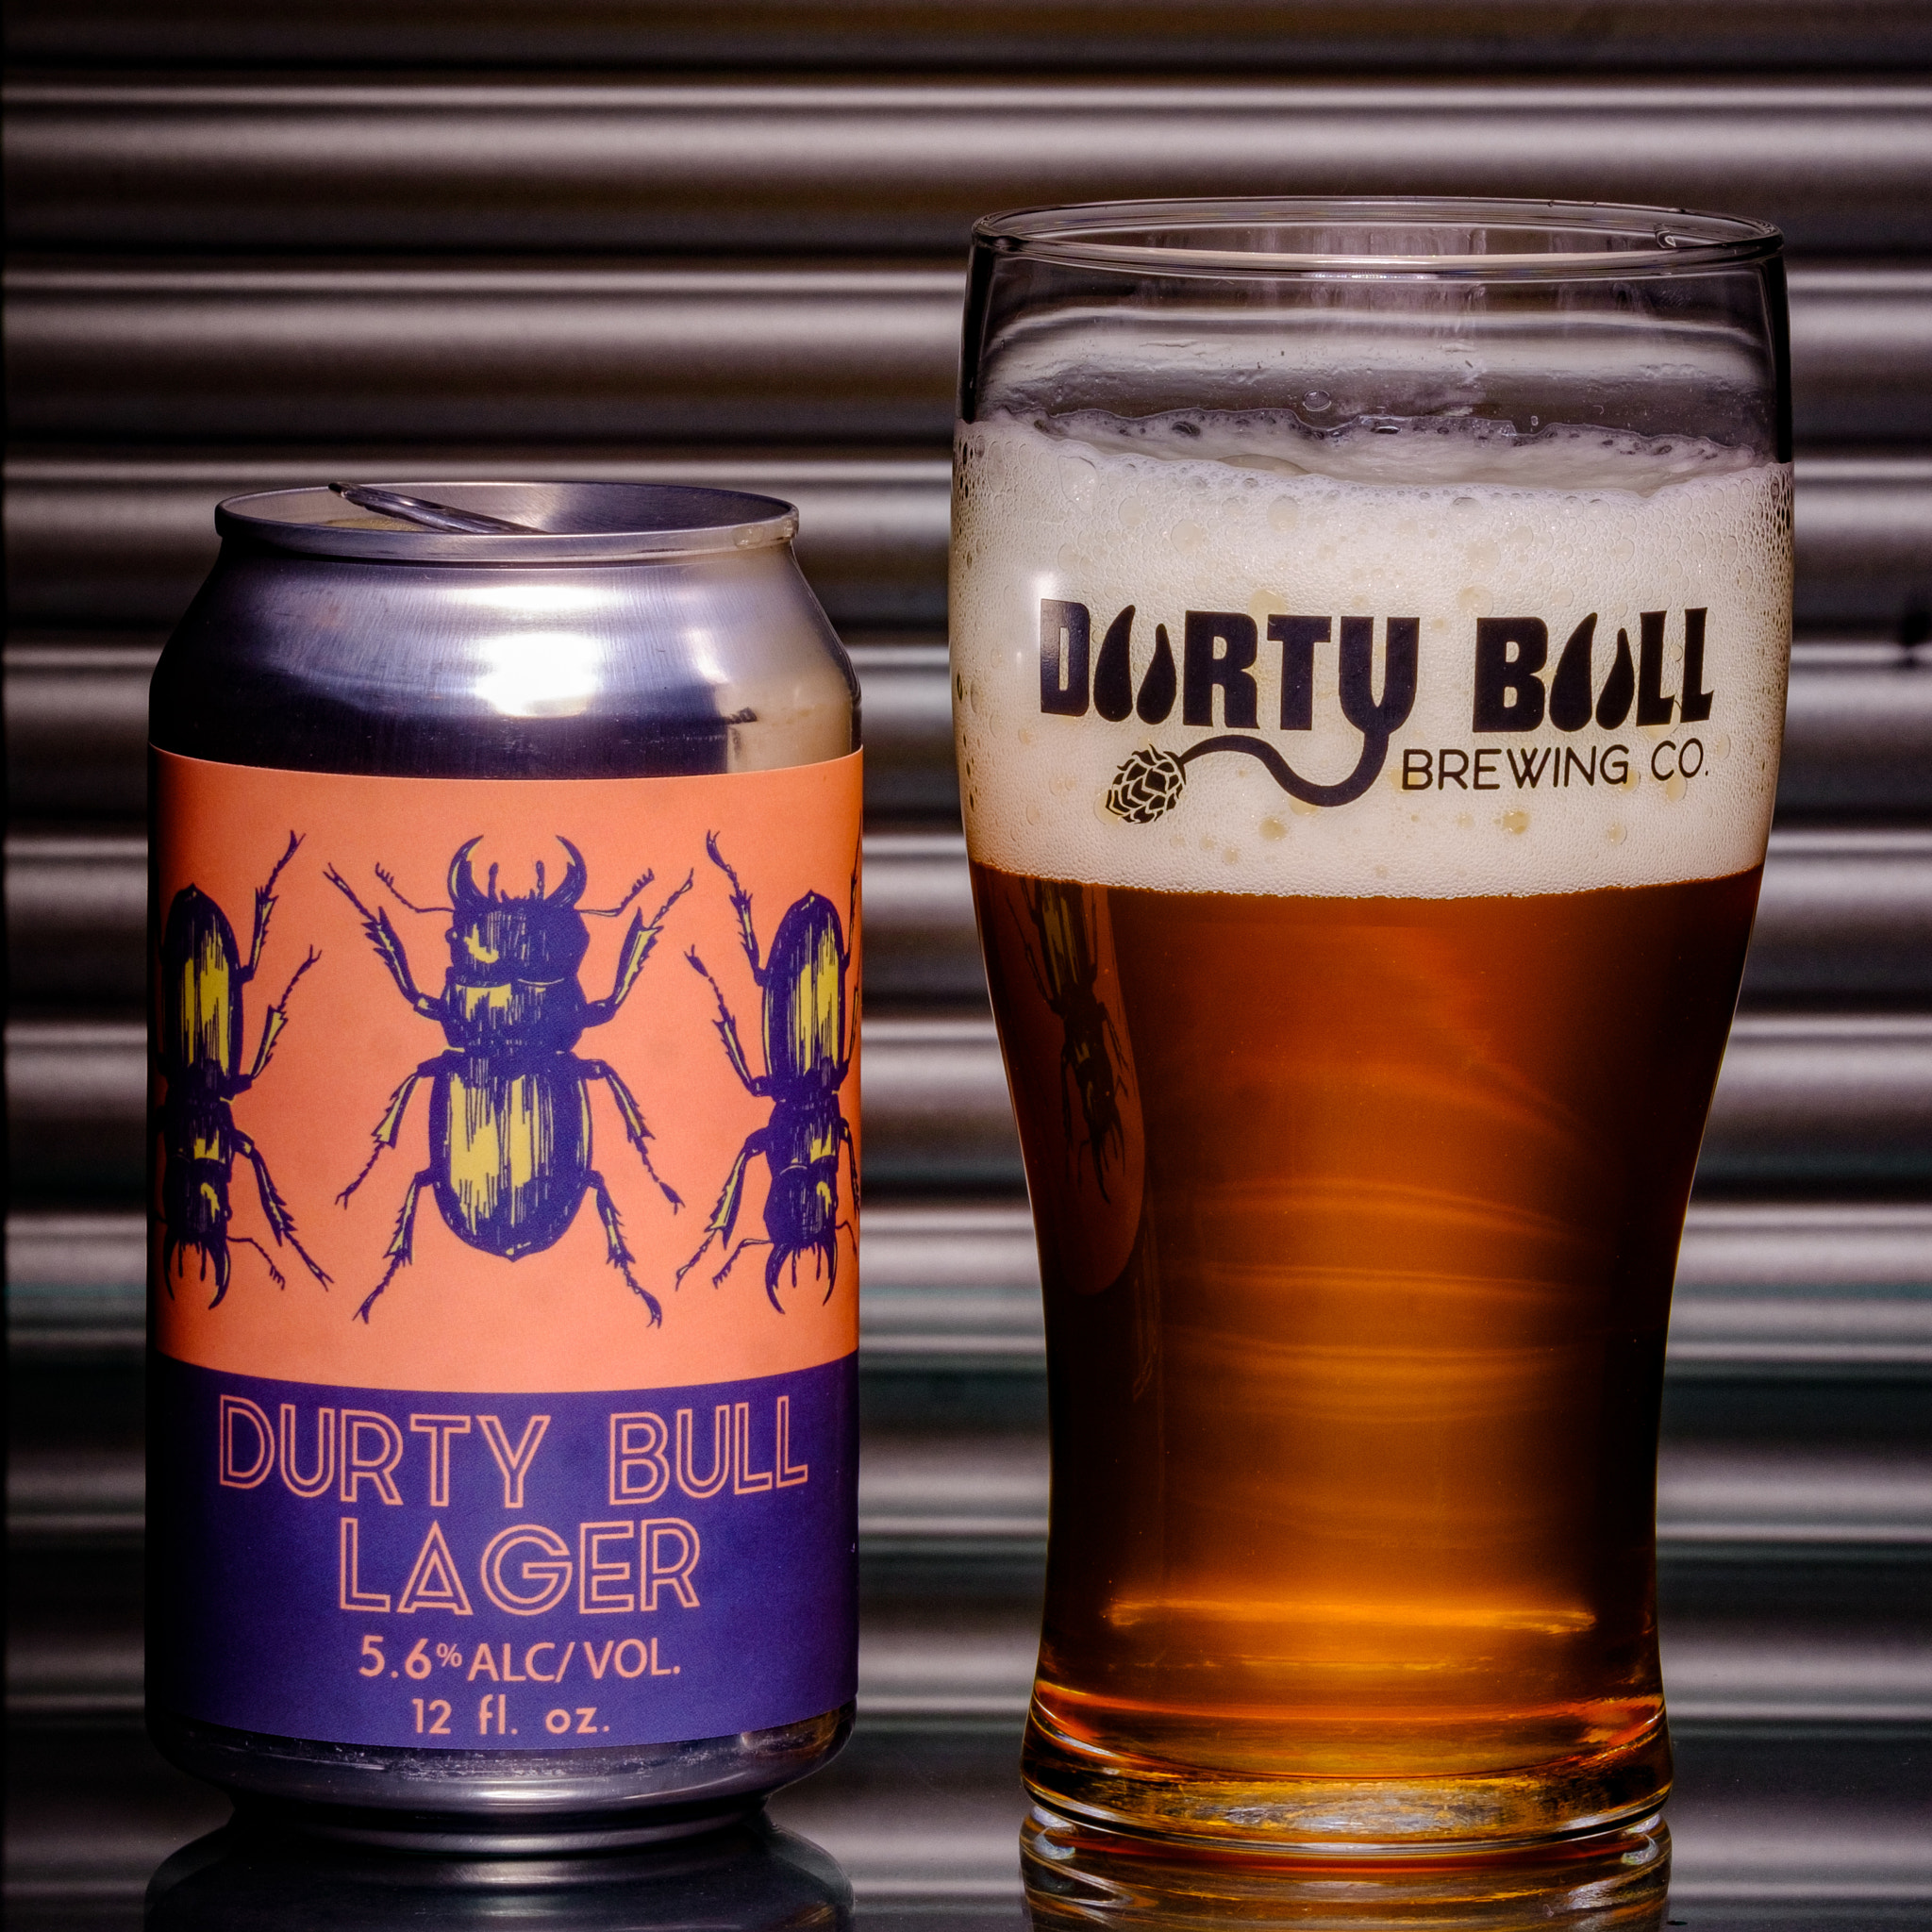 Fujifilm X-T2 sample photo. Durty bull lager photography